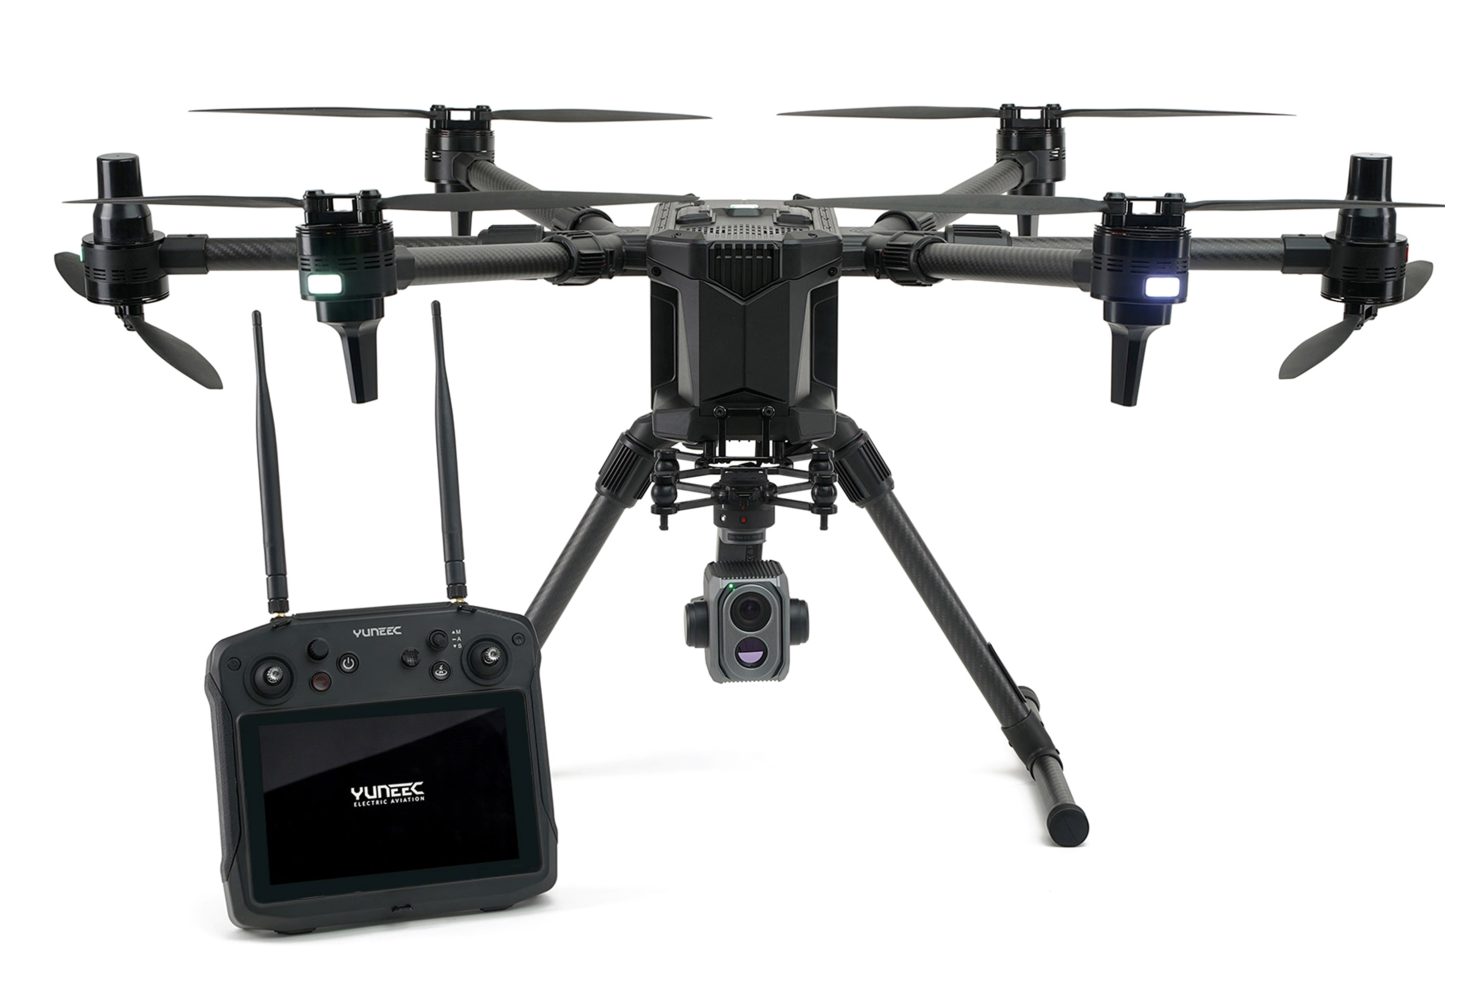 Yuneec announces new H850 drone with over 60 mins of flight time